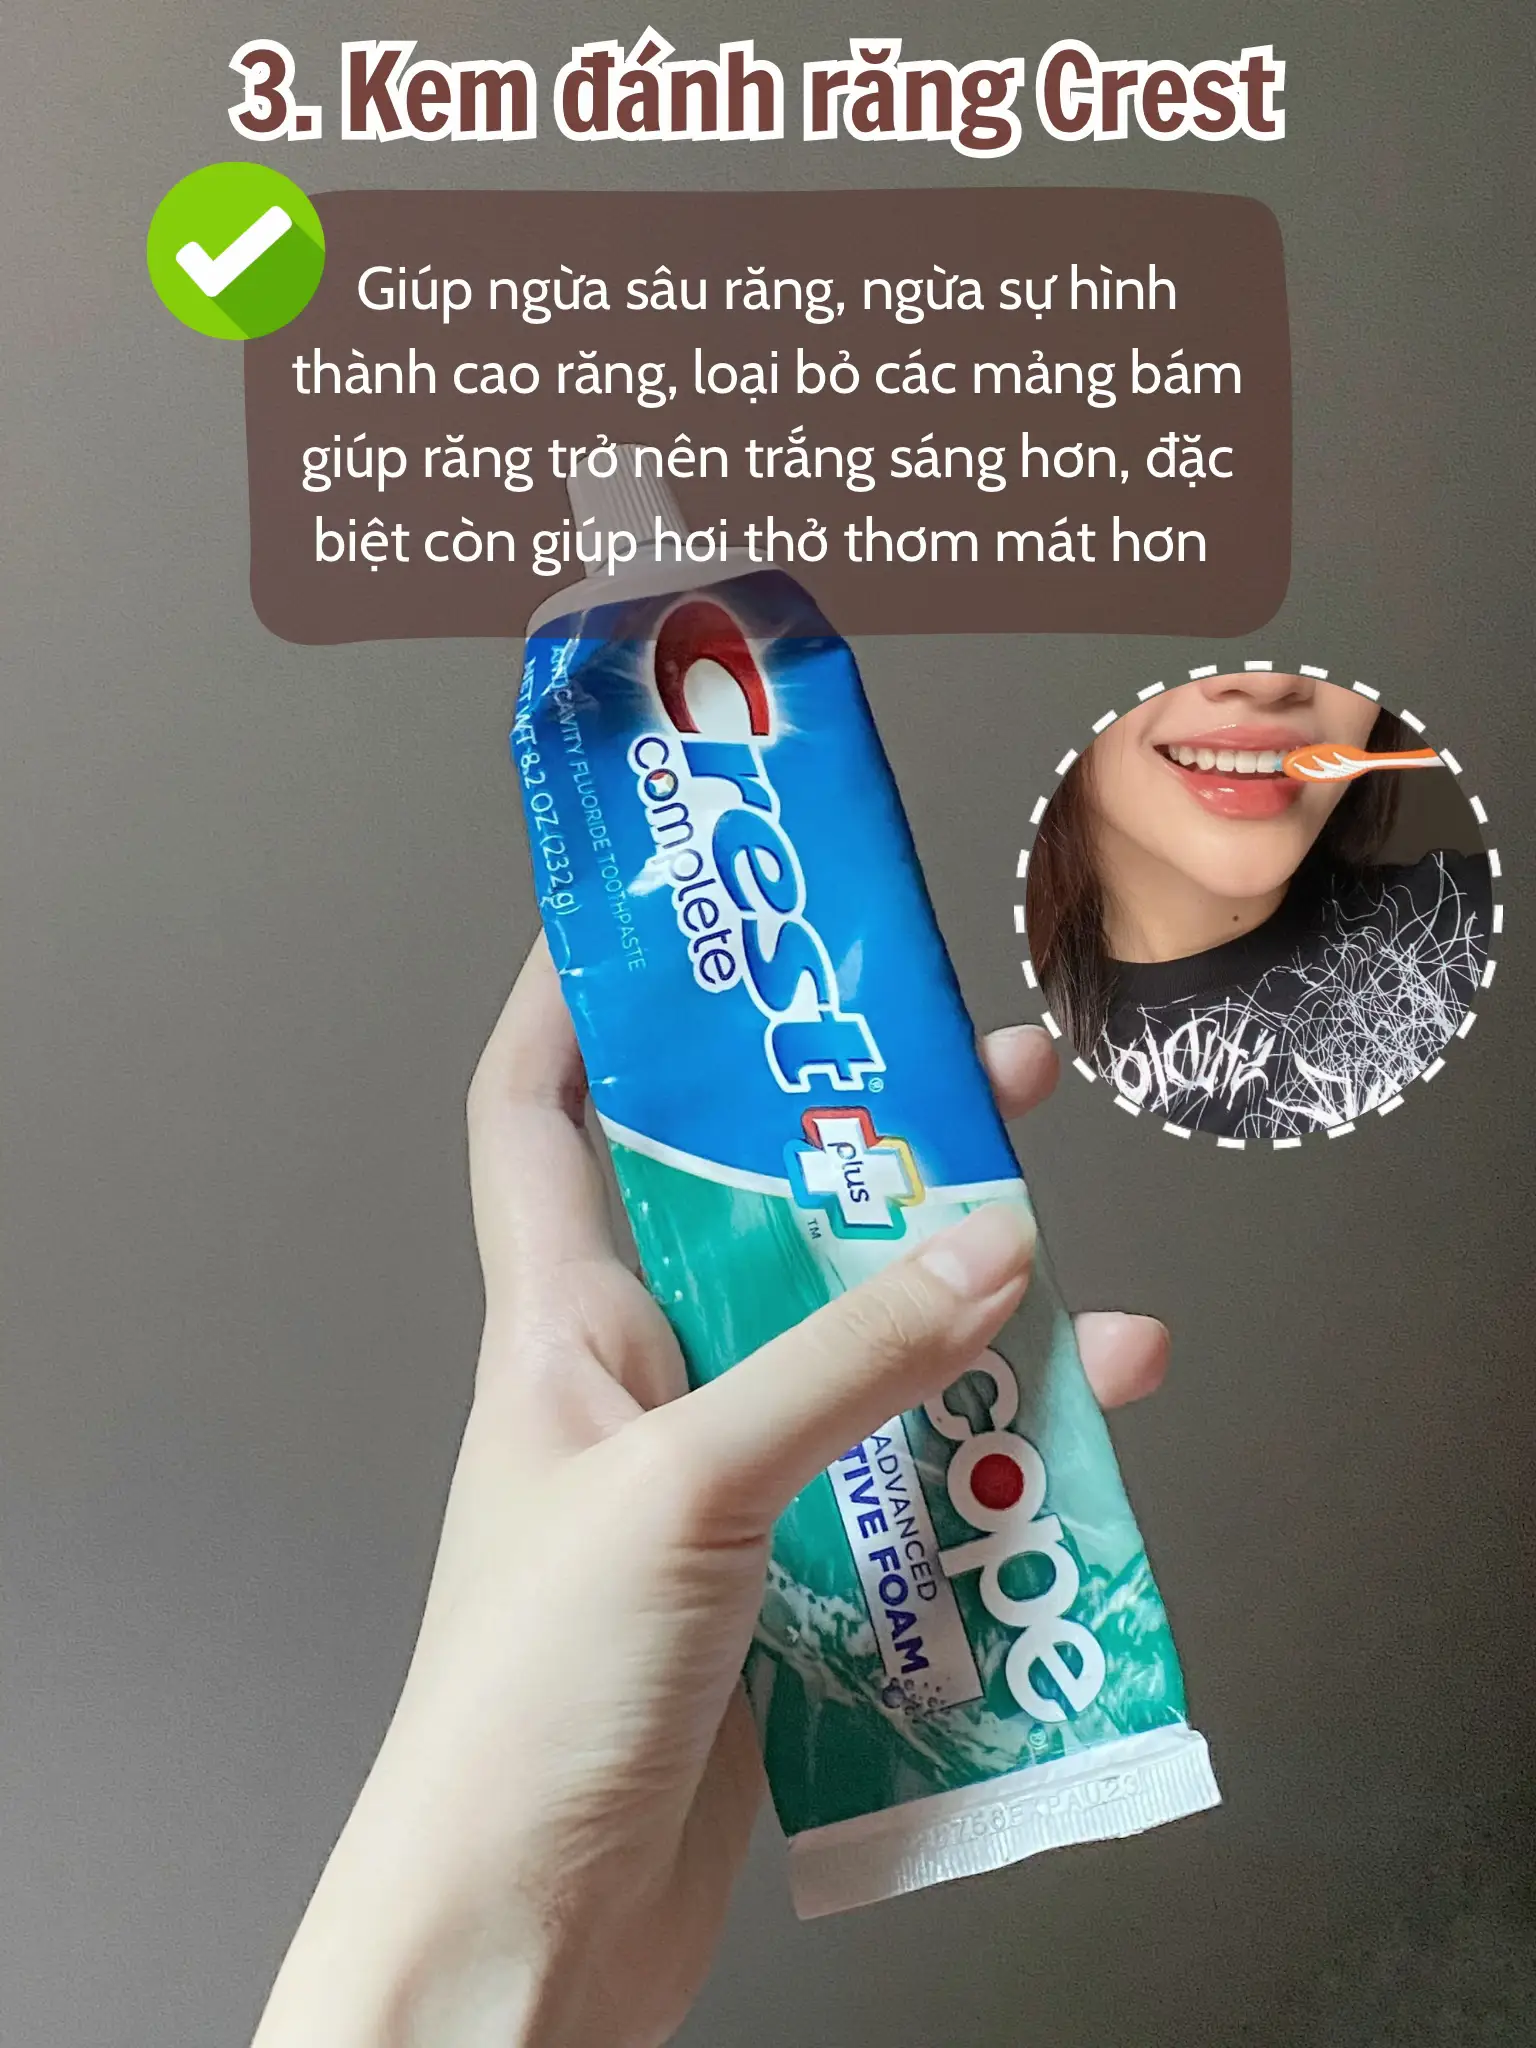  A person is holding a tube of Crest